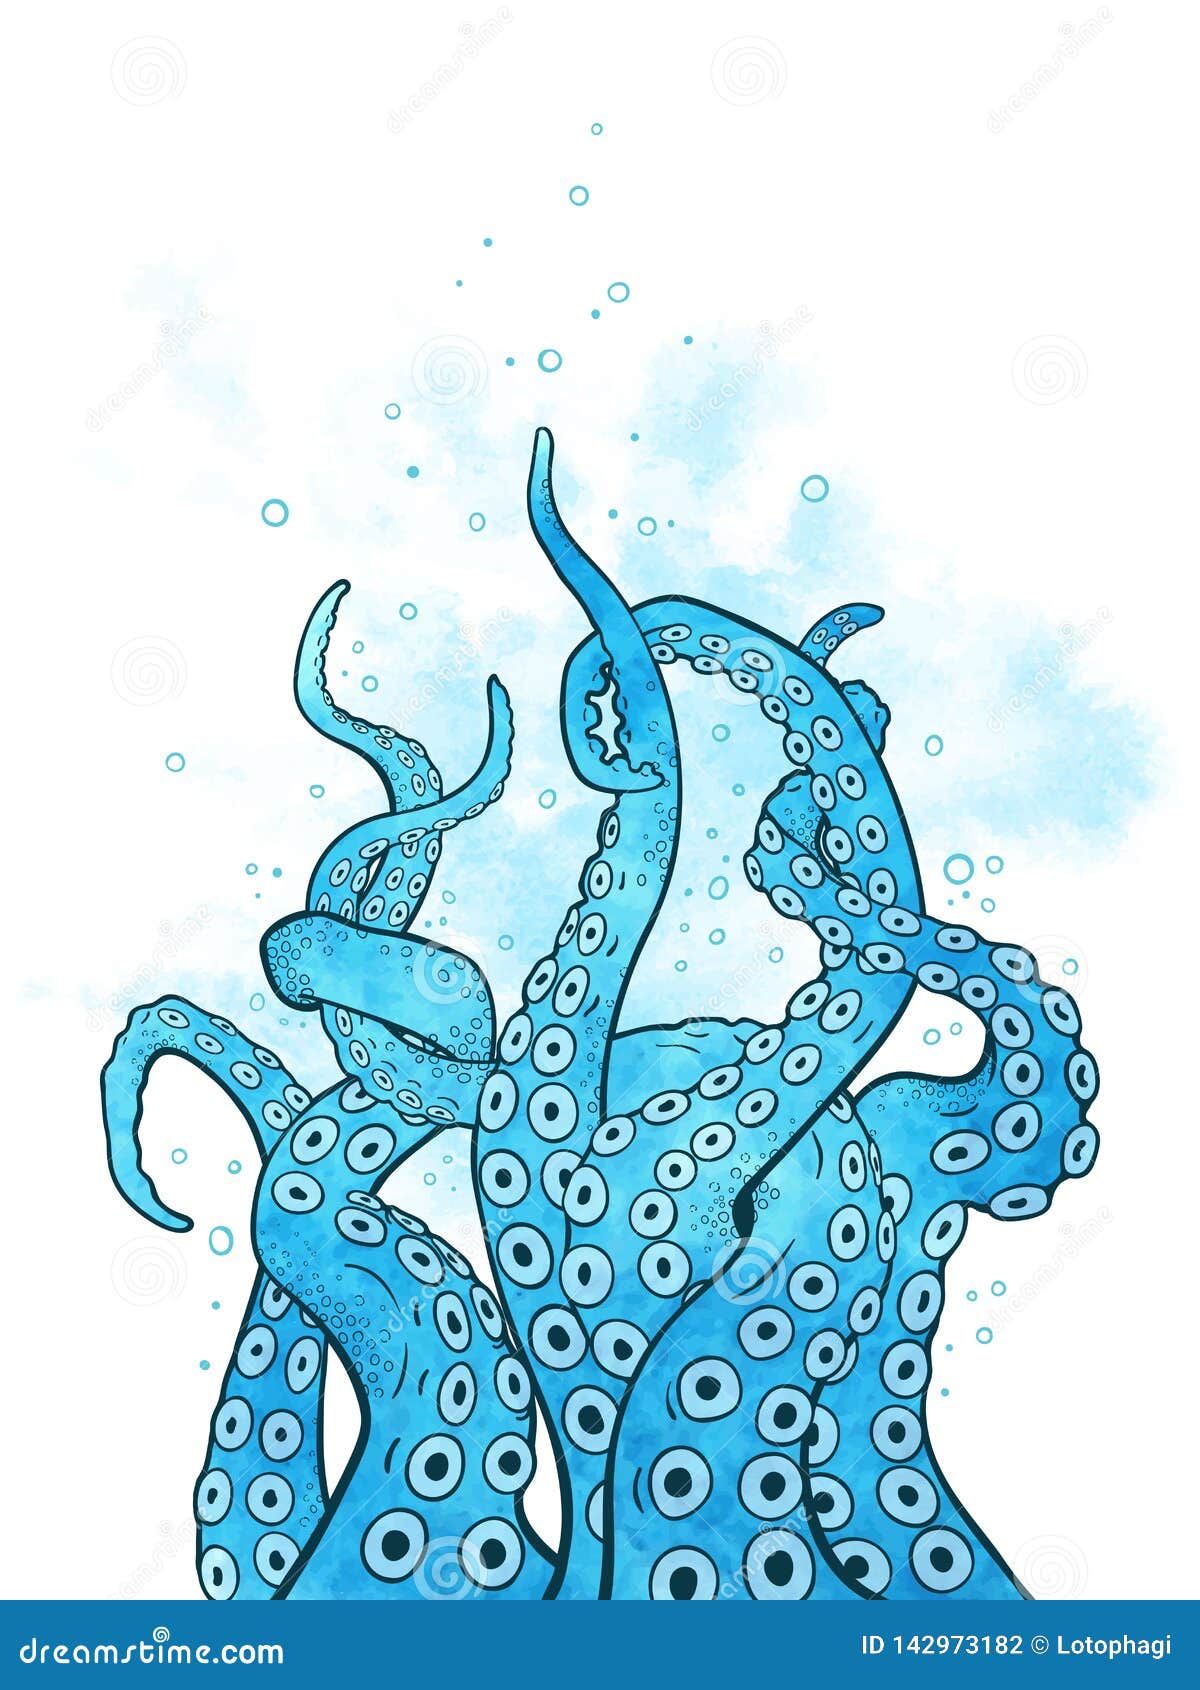 octopus tentacles curl and intertwined hand drawn line art with blue watercolor s background or print  vetor